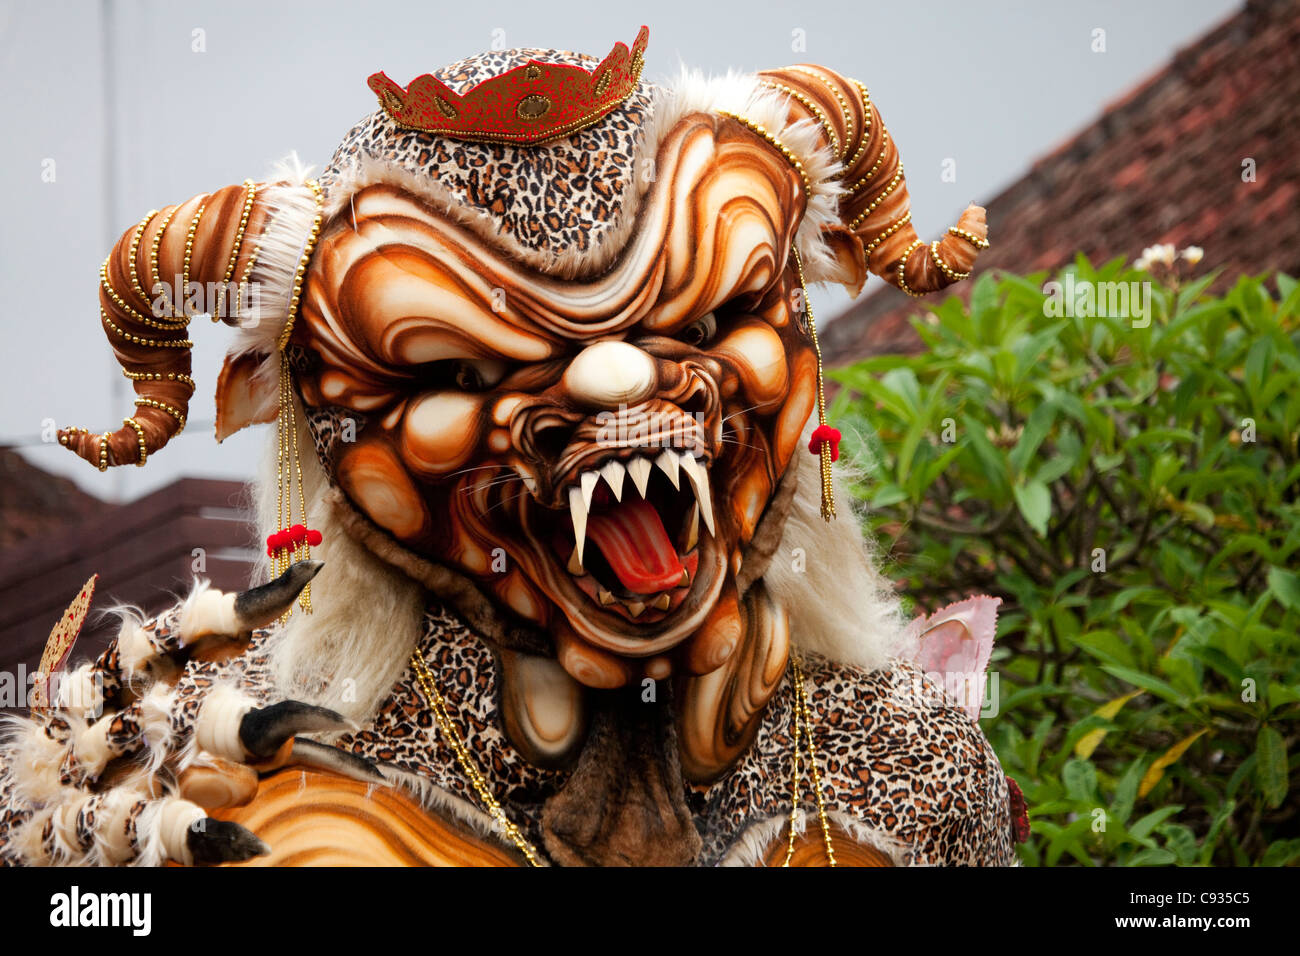 Bali, Ubud. villages spend weeks crafting their Ogoh-ogoh monsters for the Nyepi New Year celebrations. Stock Photo